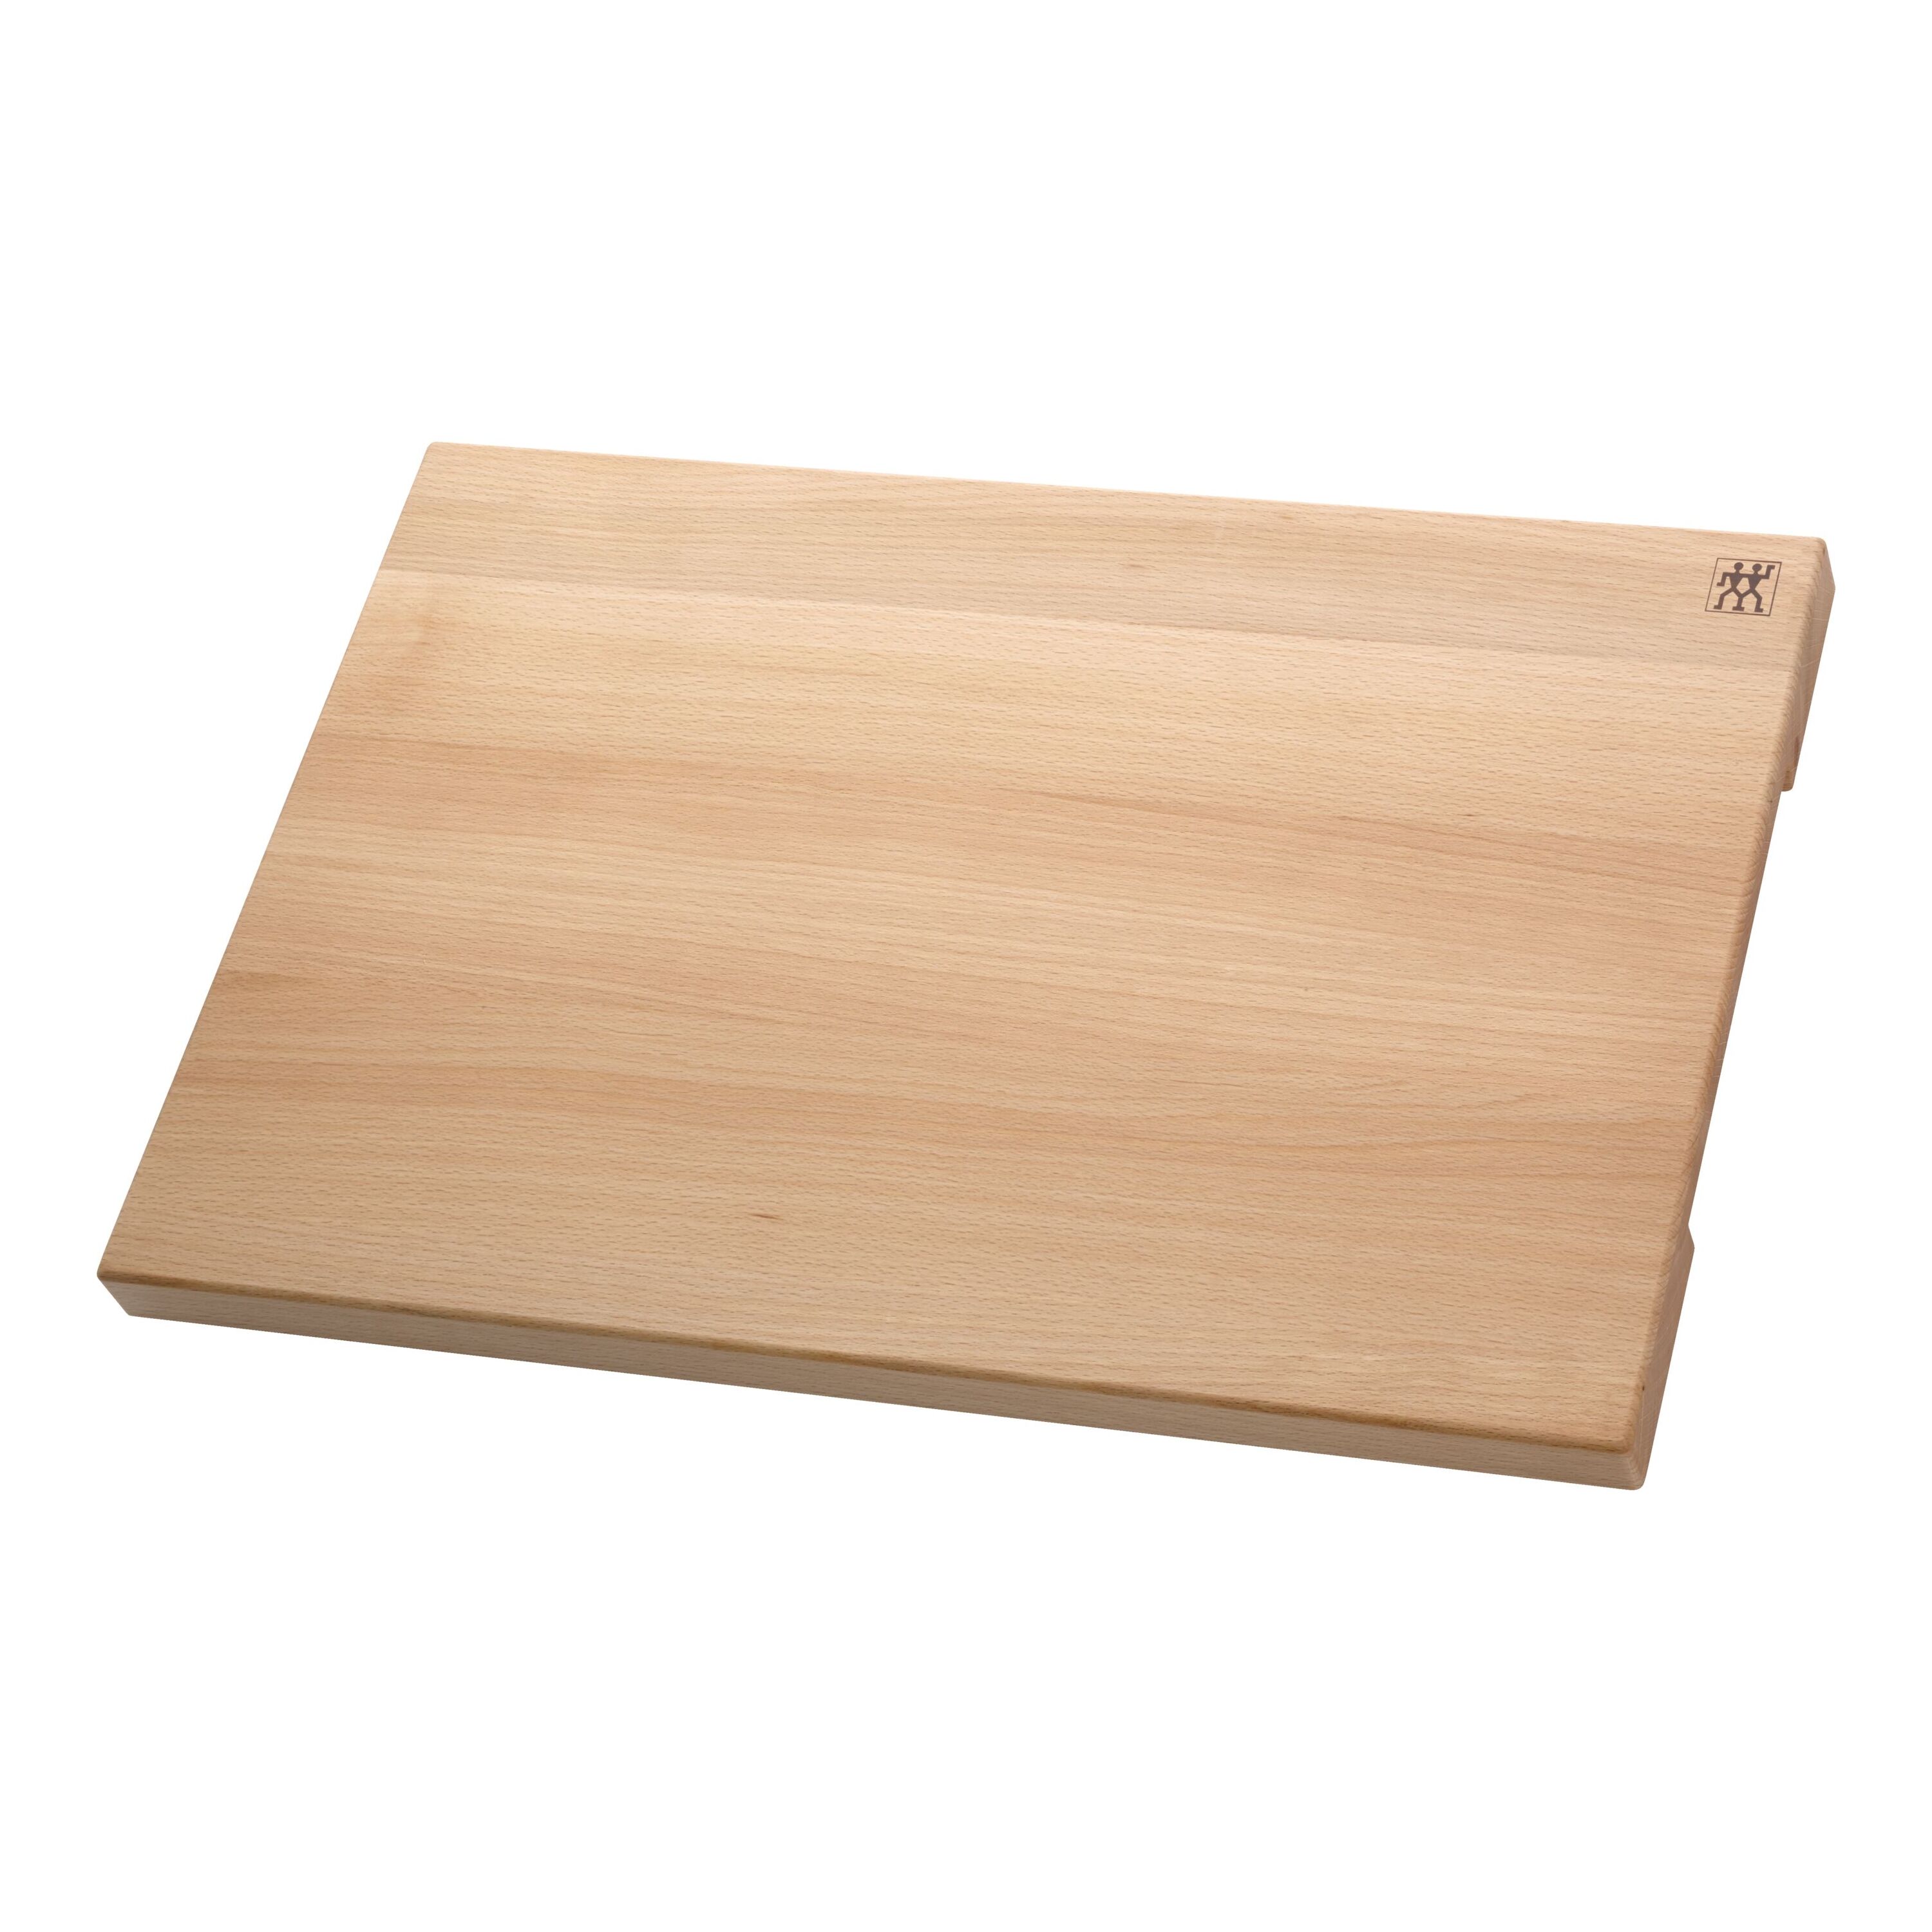 wooden cutting board with spikes